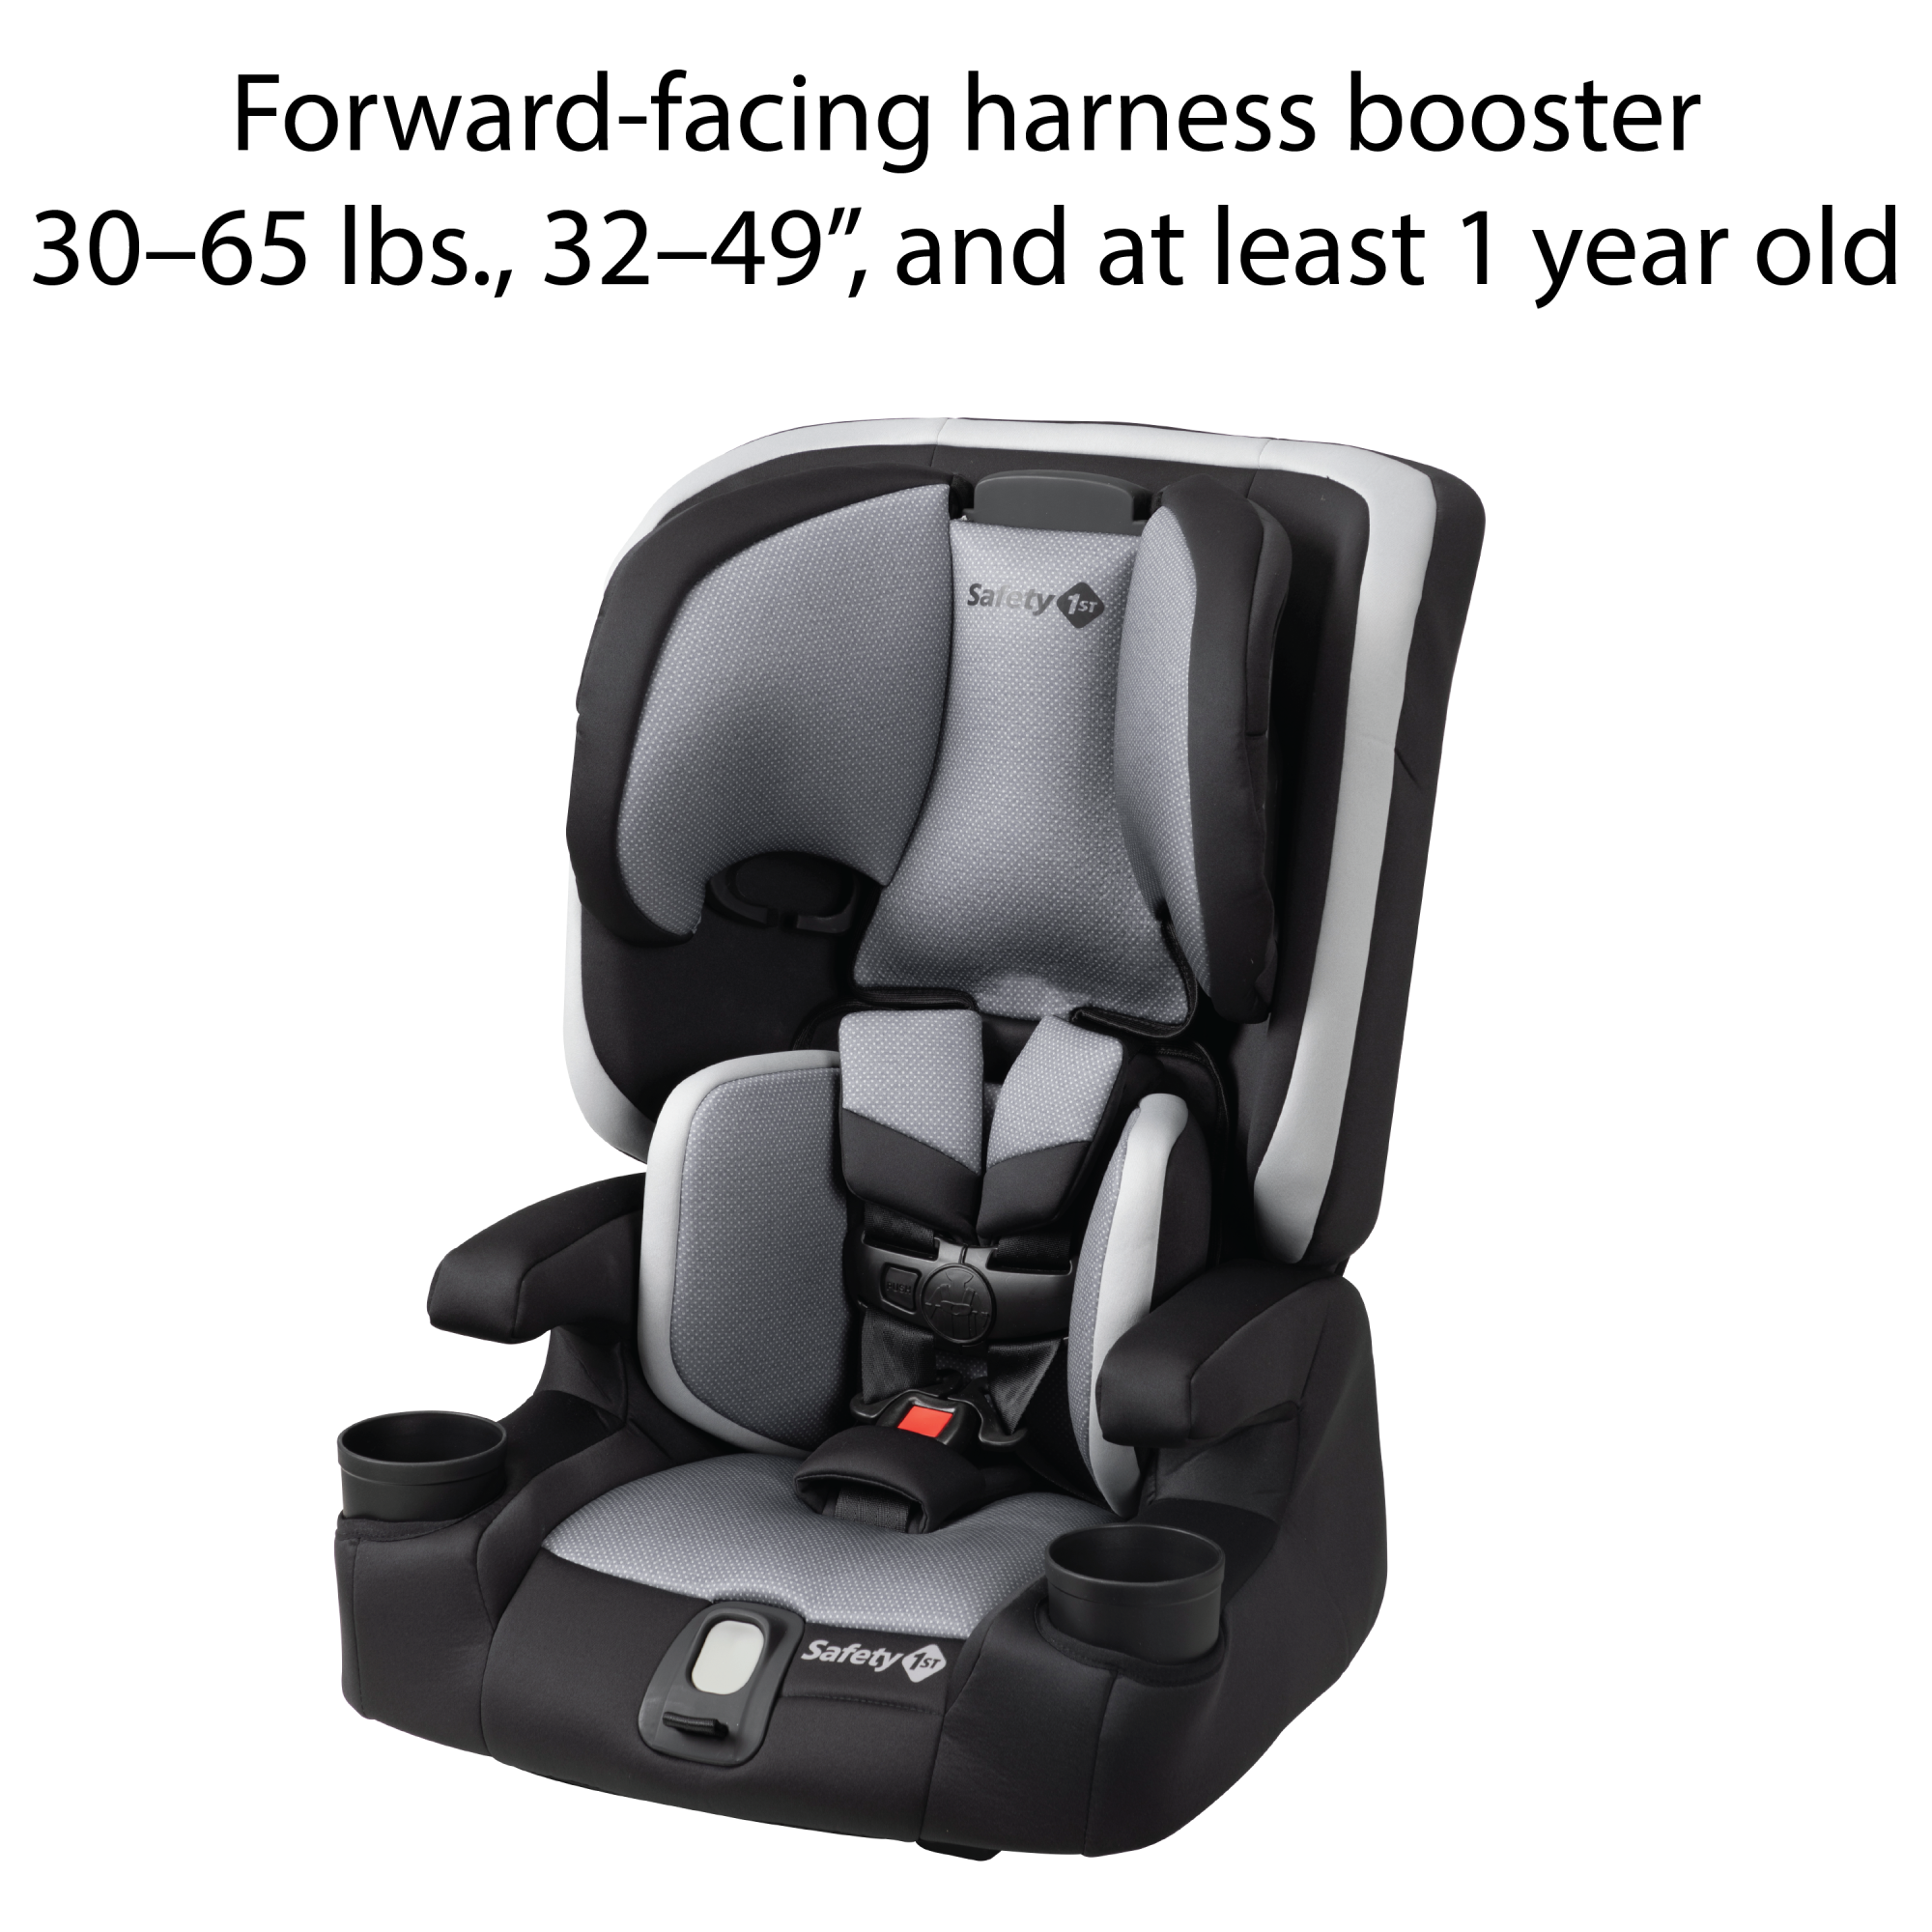 Boost-and-Go All-in-One Harness Booster Car Seat - forward-facing harness booster 30-65 lbs., 32-49", and at least 1 year old